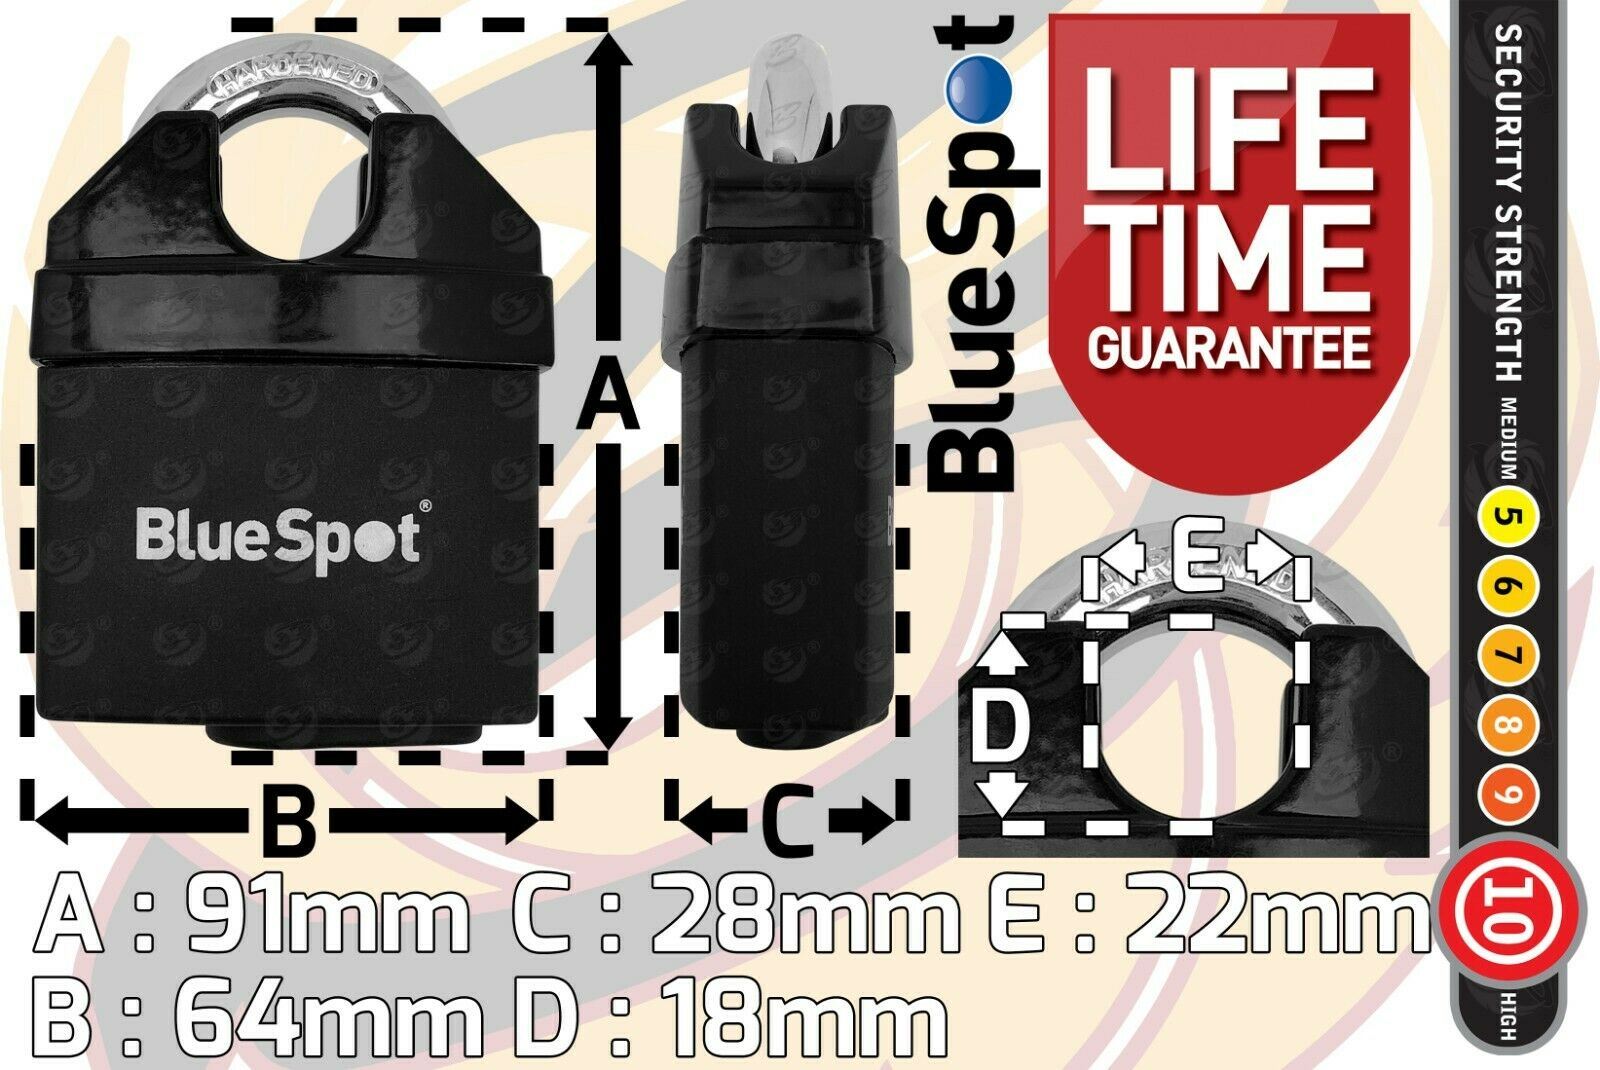 BLUESPOT 3FT LONG 10MM LINKS SECURITY CHAIN WITH 65MM HIGH SECURITY PADLOCK